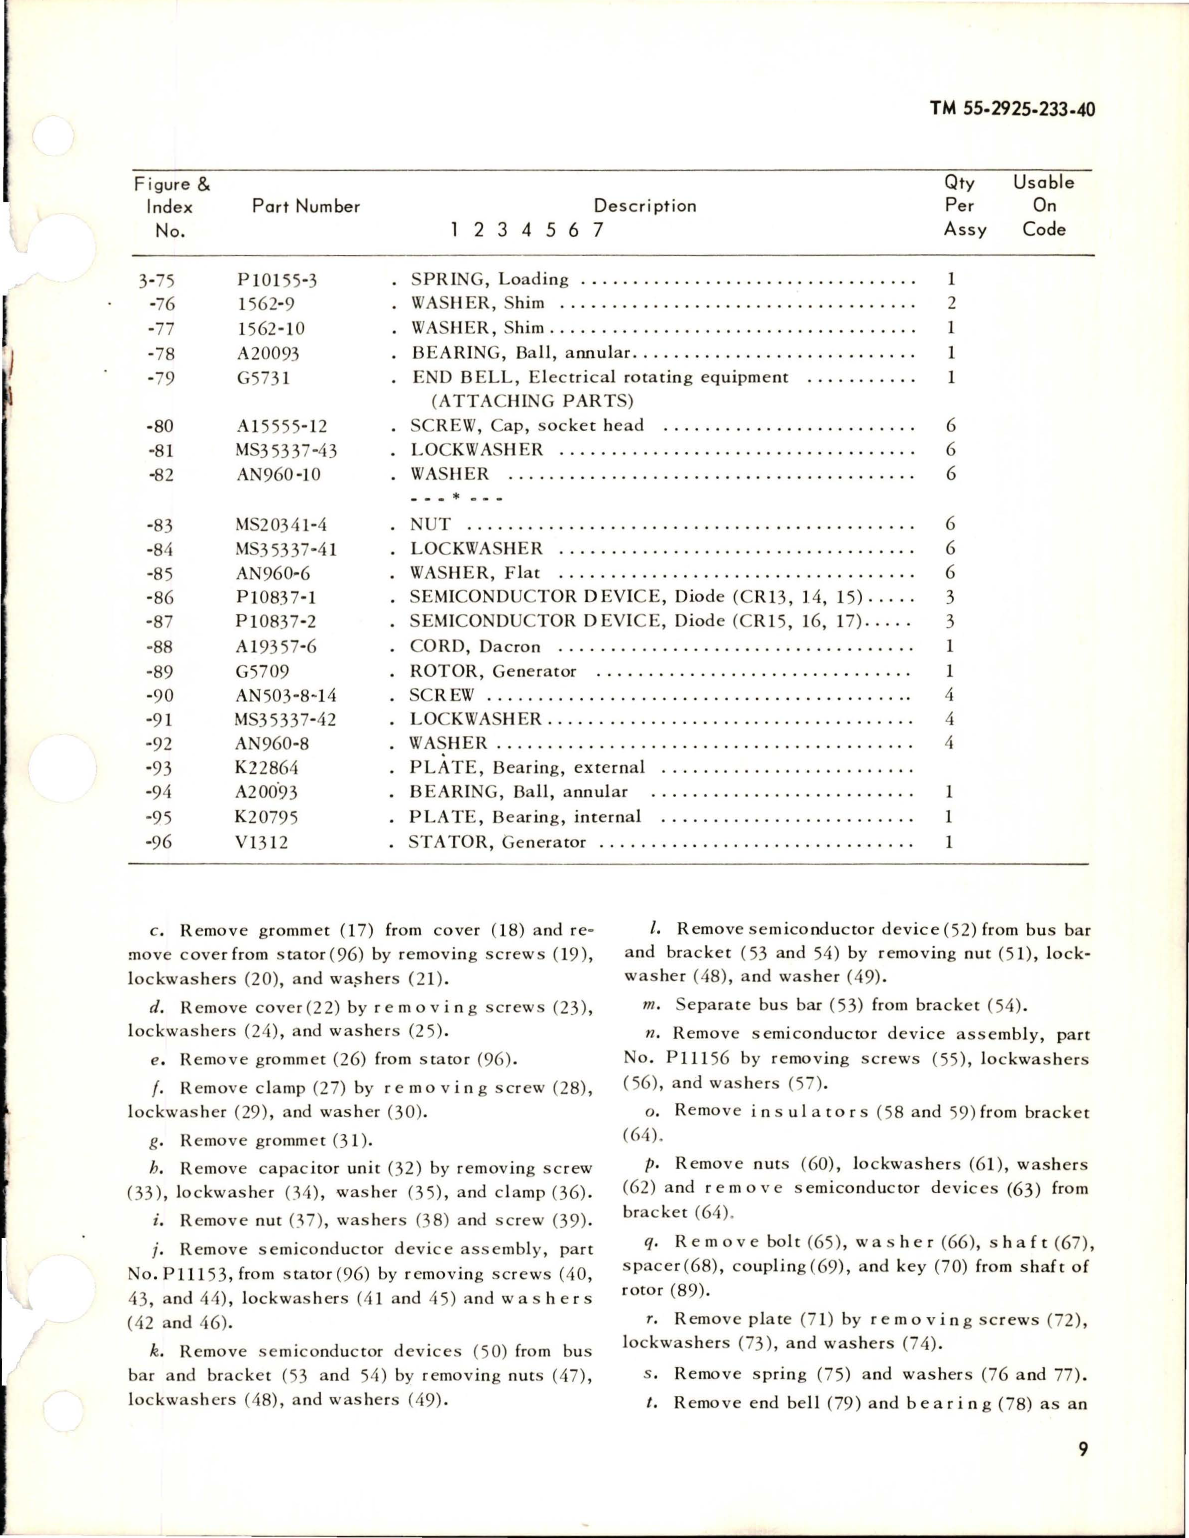 Sample page 9 from AirCorps Library document: Maintenance Manual for DC Generator - Part DGH212-1